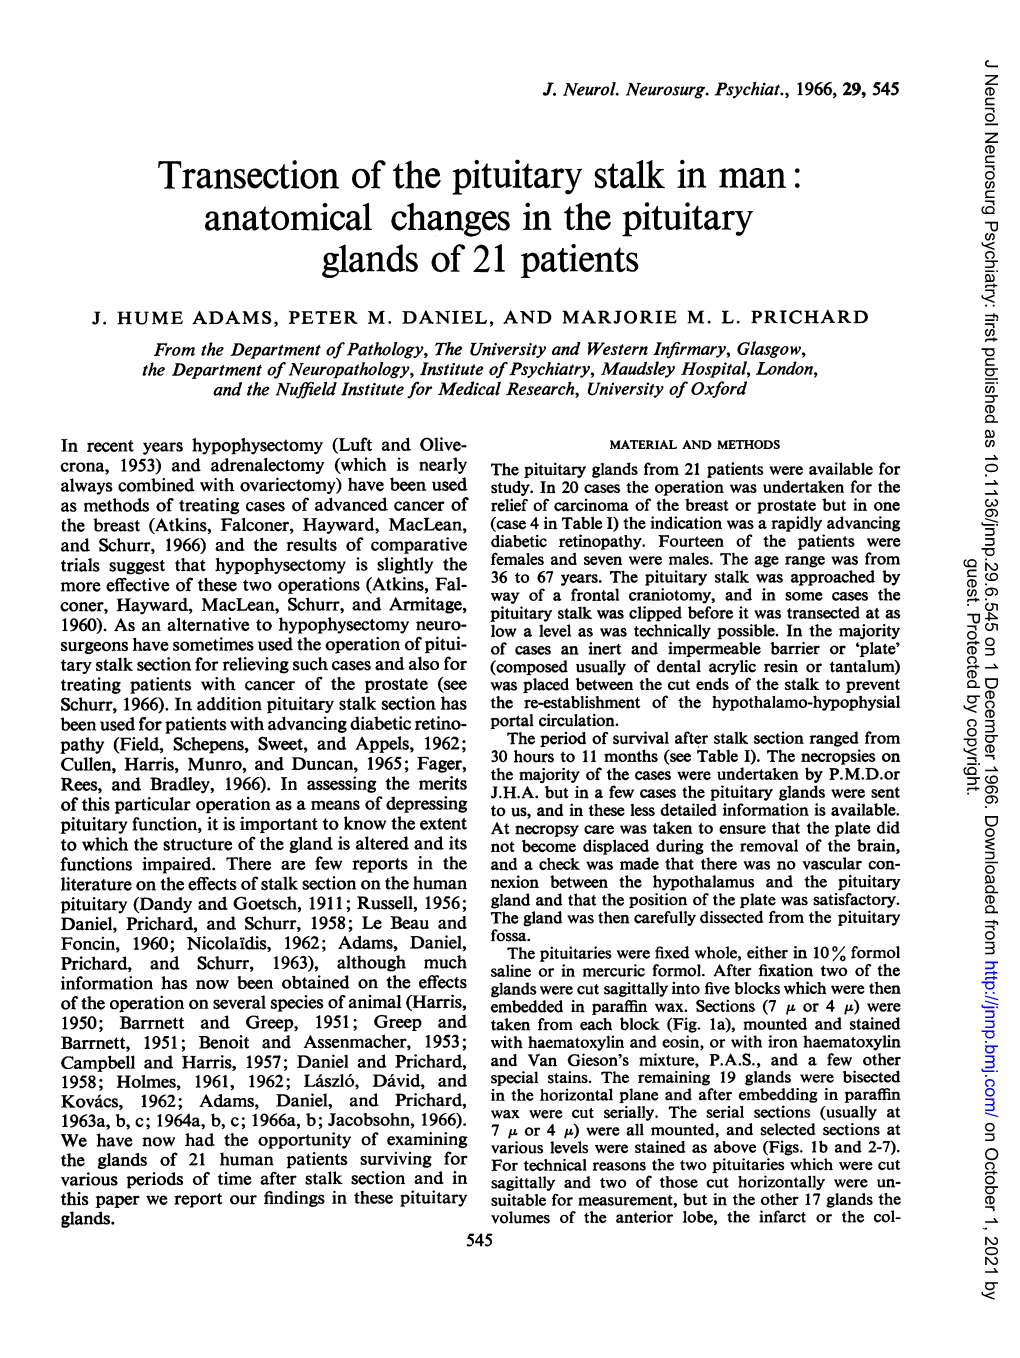 Transection of the Pituitary Stalk in Man Anatomical Changes in the